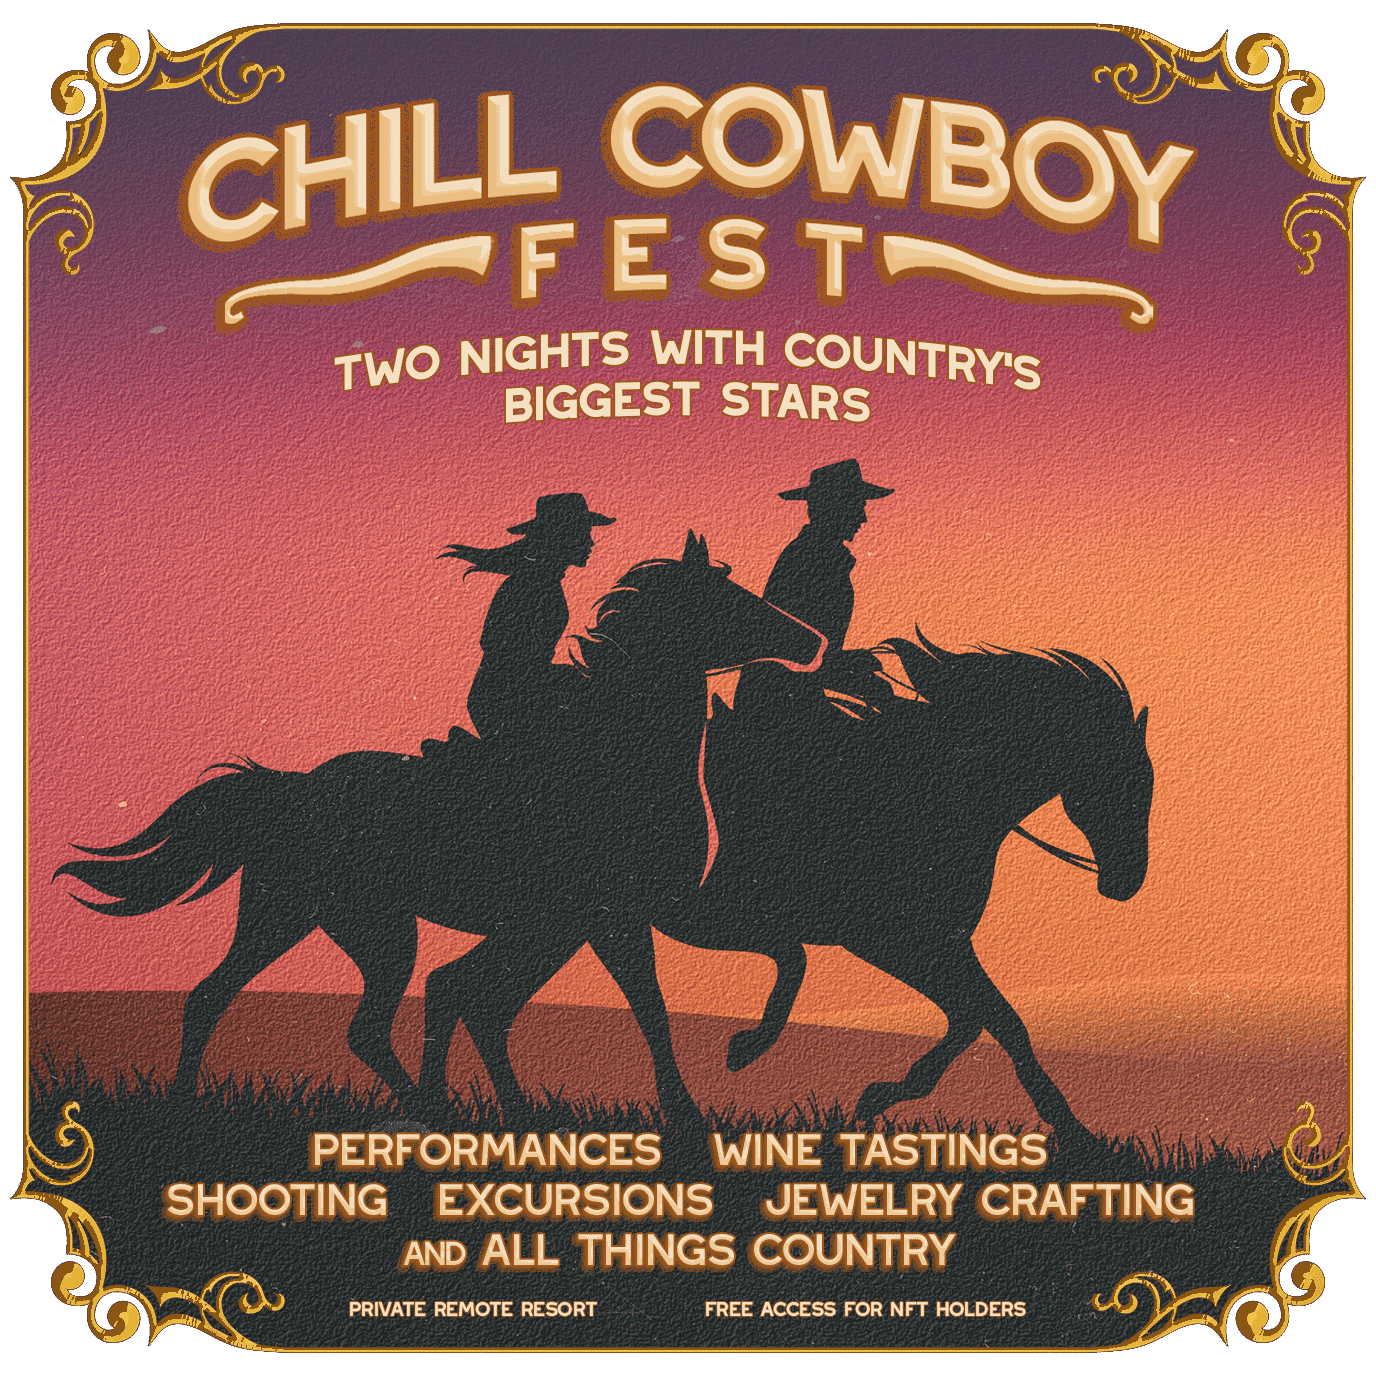 Child Cowboy Fest NFT event digital poster created by Brian Kelly and Brittany Kelly